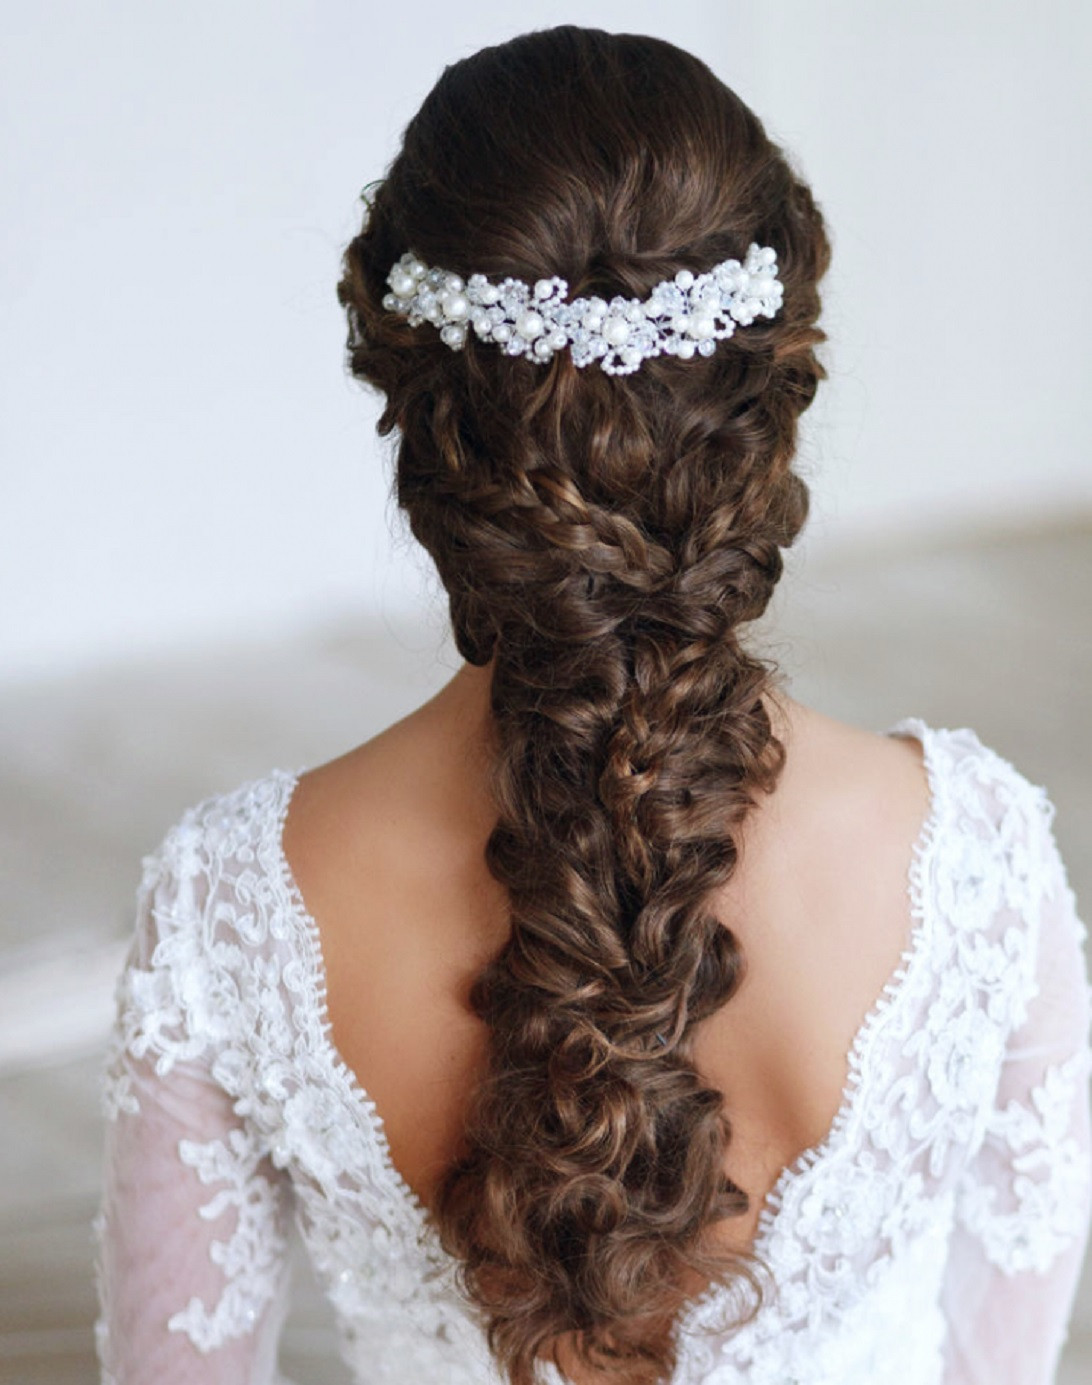 Wedding Hairstyles With Braids For Bridesmaids
 6 Bridal Hairstyle Tips for Your Big day